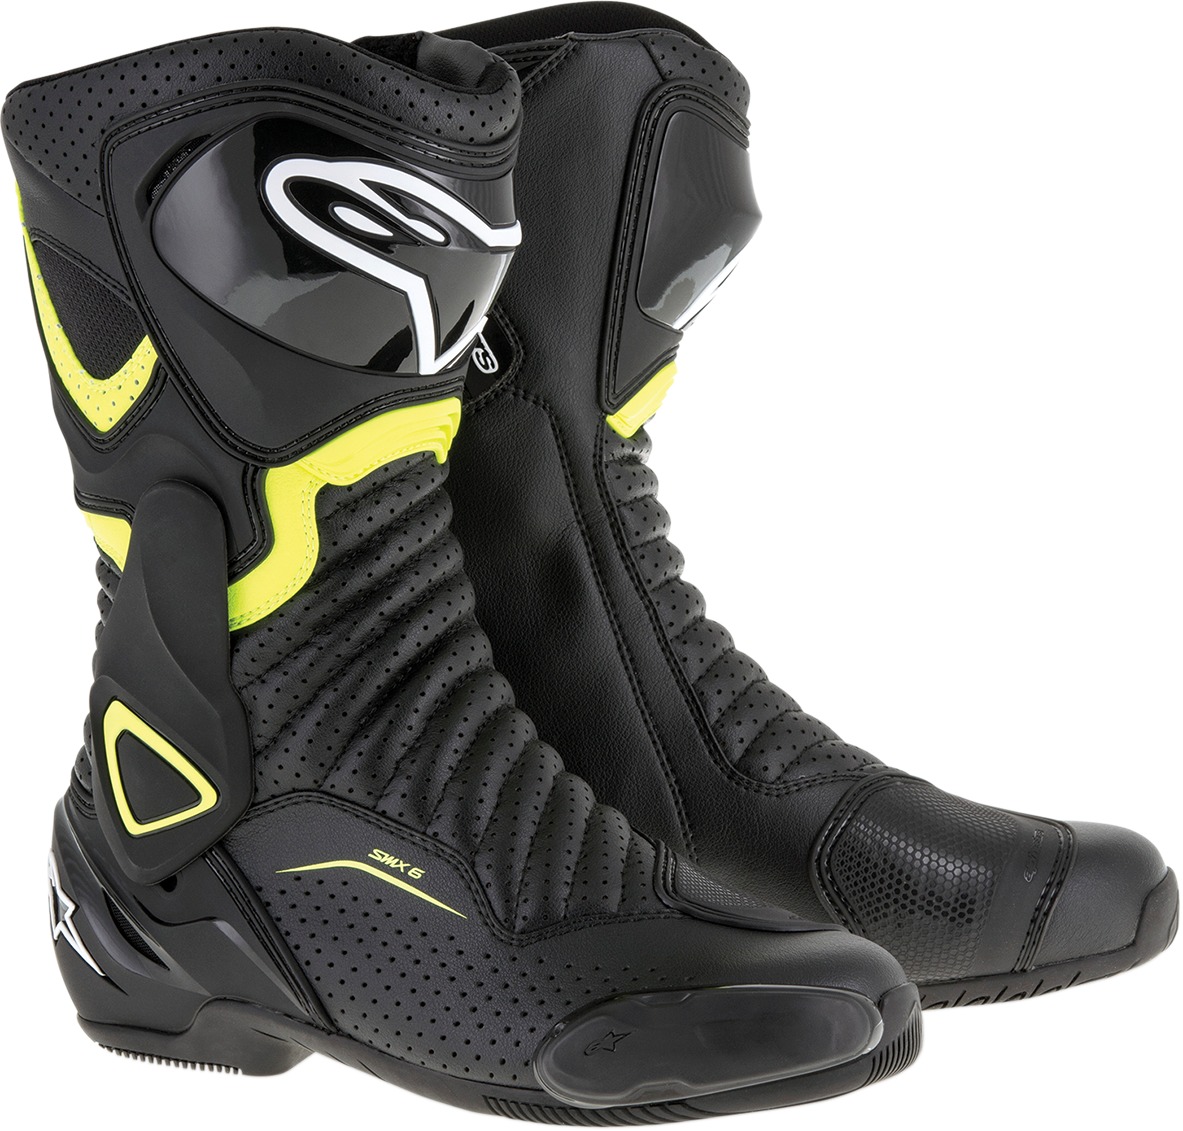 SMX-6v2 Vented Street Riding Boots Black/Yellow US 13.5 - Click Image to Close